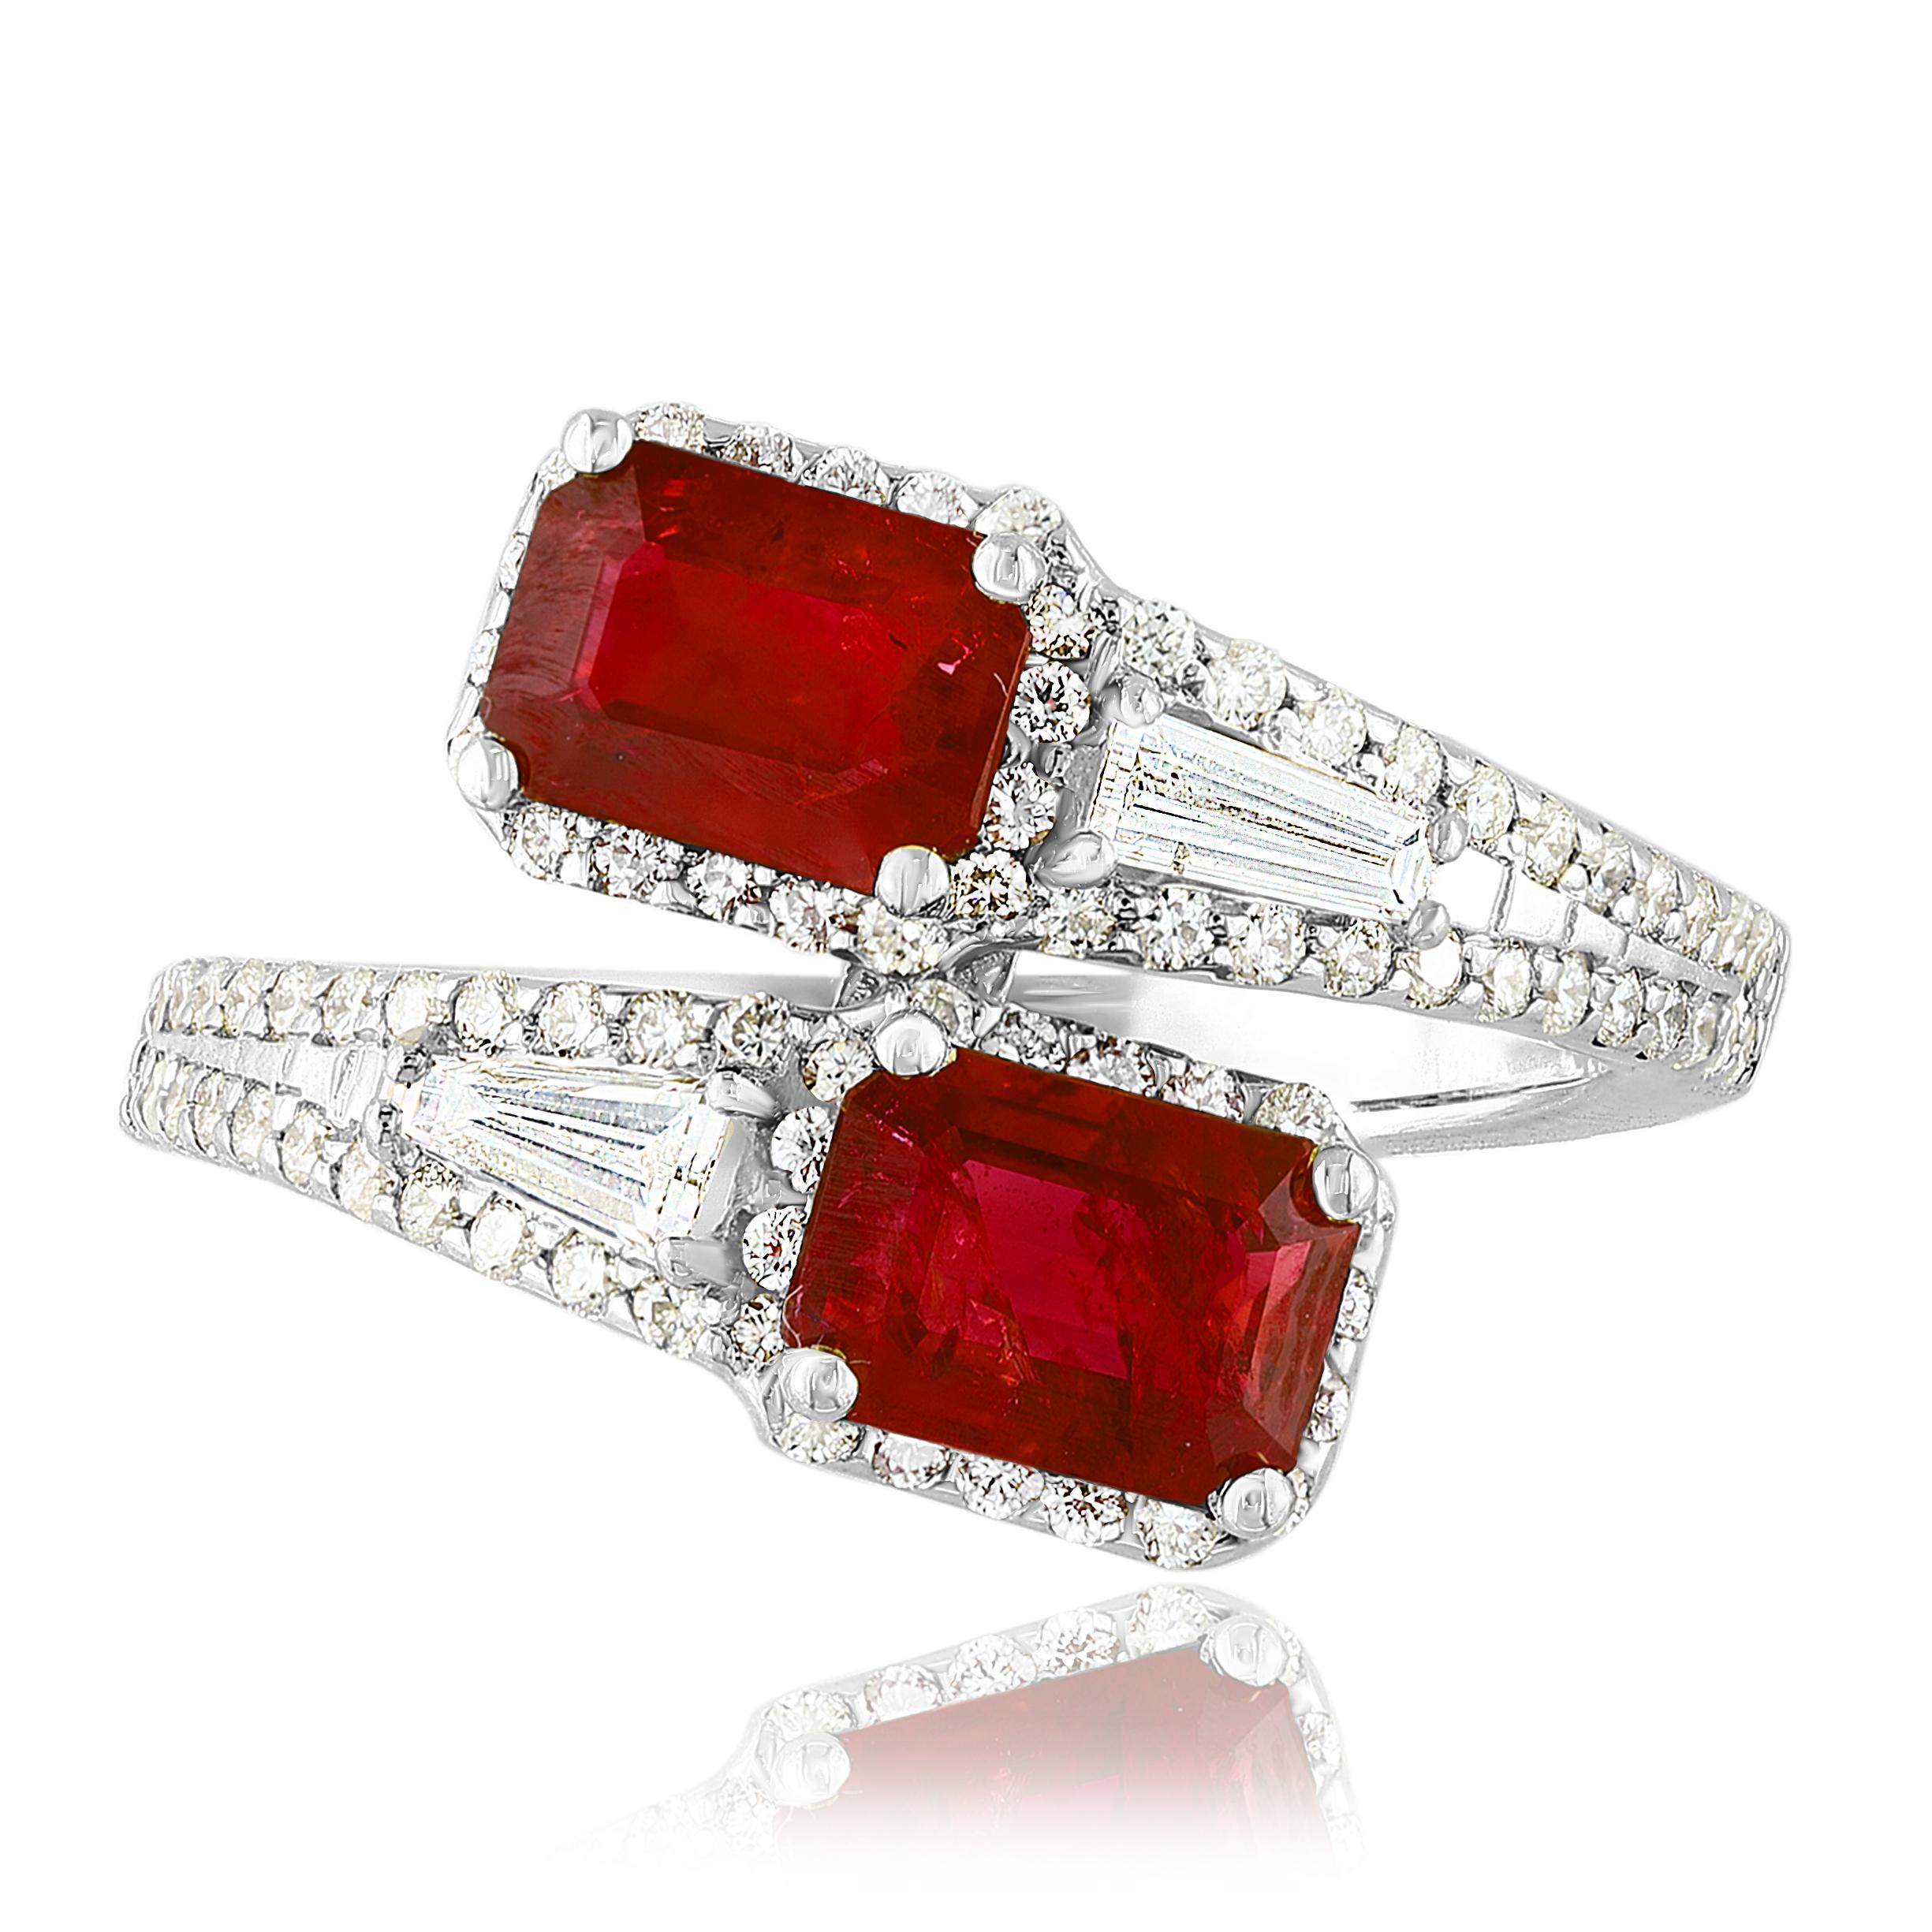 The stunning forever-together Toi et Moi ring features 2 Emerald cut Rubies embraced by east to west 2 baguette diamonds weigh and 84 round diamonds halfway to the shank. Handcrafted in 14k White Gold.
2 emerald cut Rubies in the center weighs 2.18